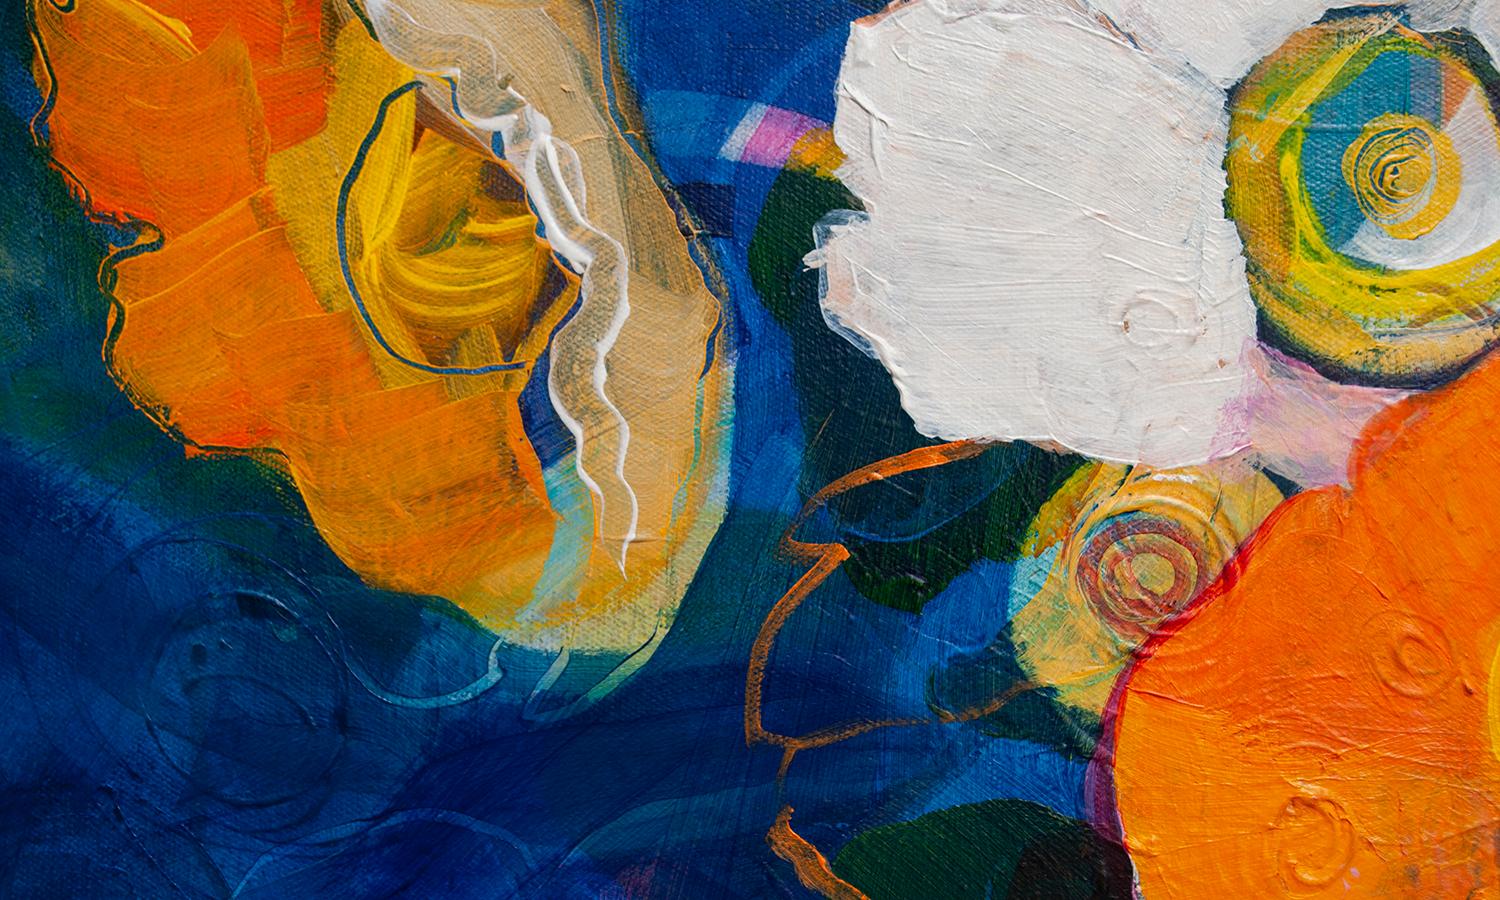 <p>Artist Comments<br>Bright yellow-orange poppies dance on a saturated blue background. Ruth-Anne built up the composition in many layers, resulting in focal points at different depths. 